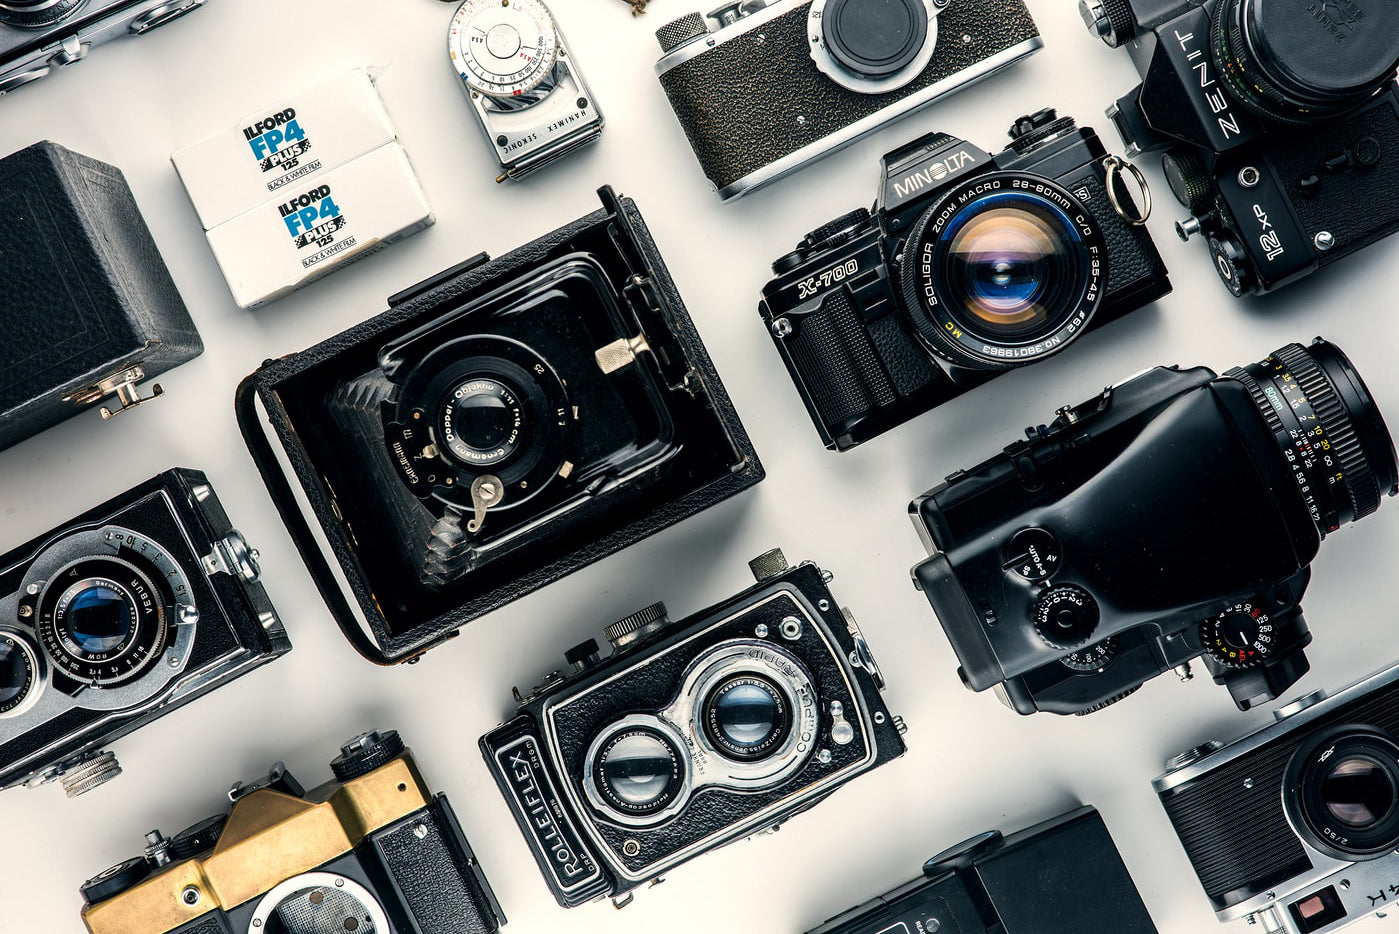 The History of Sony Cameras